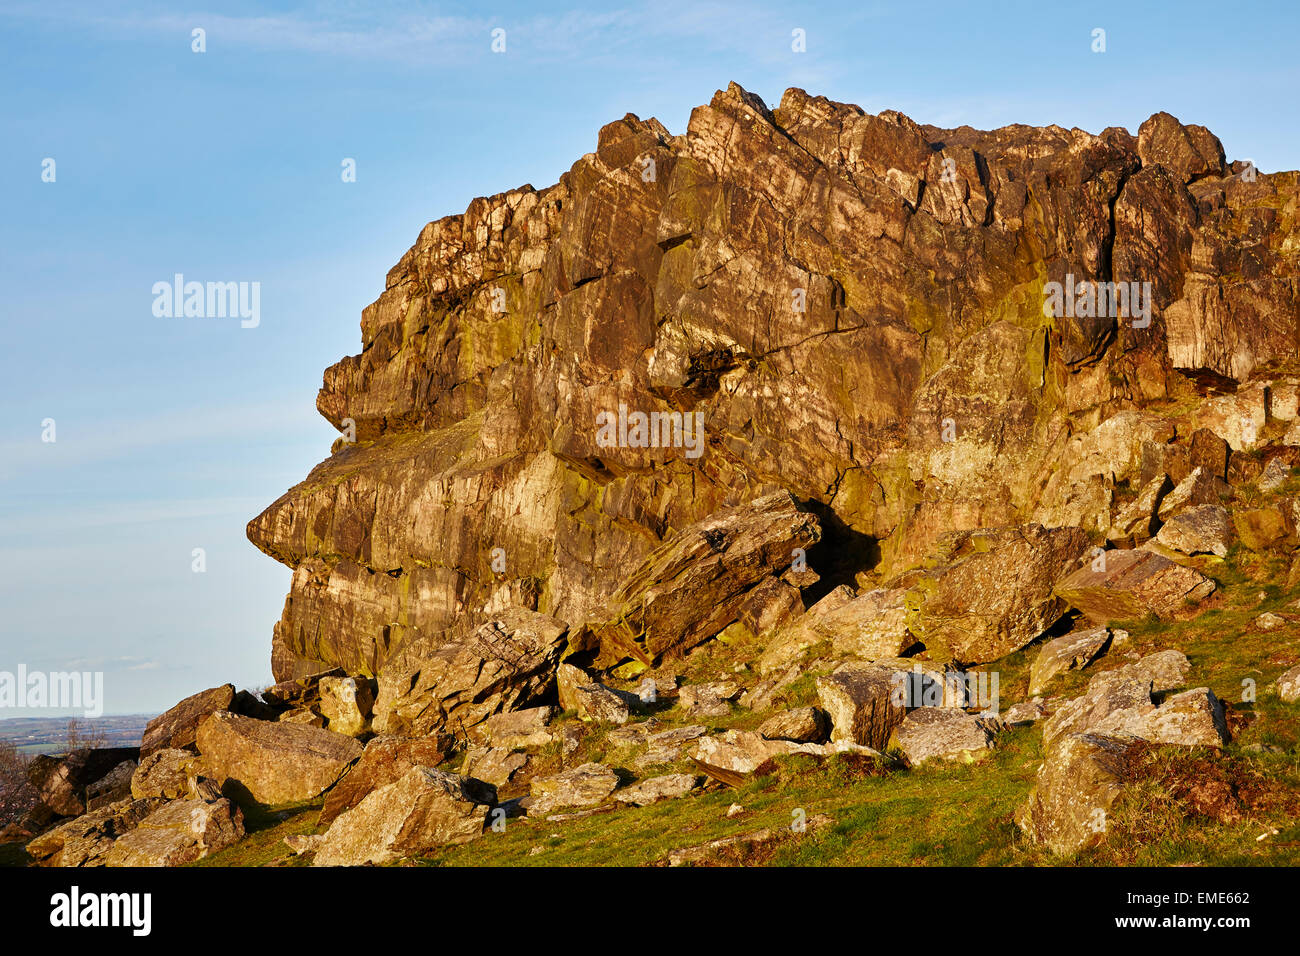 View of the Old Man of Beacon Hill natural rock formation, Beacon Hill Country Park, Leicestershire. Stock Photo